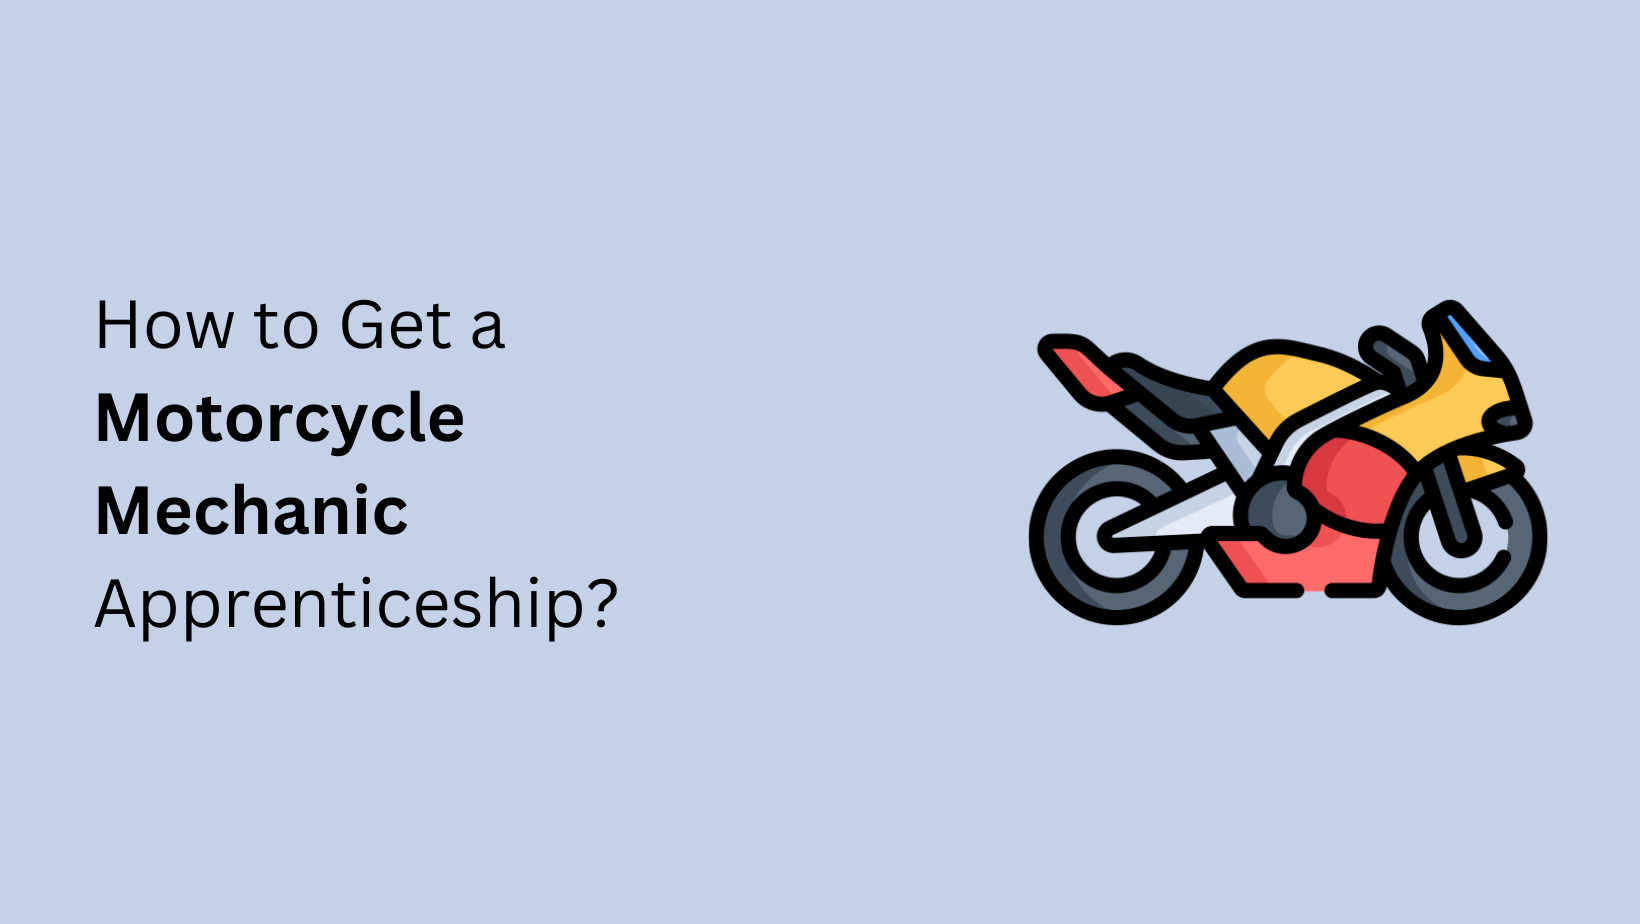 How to Get a Motorcycle Mechanic Apprenticeship